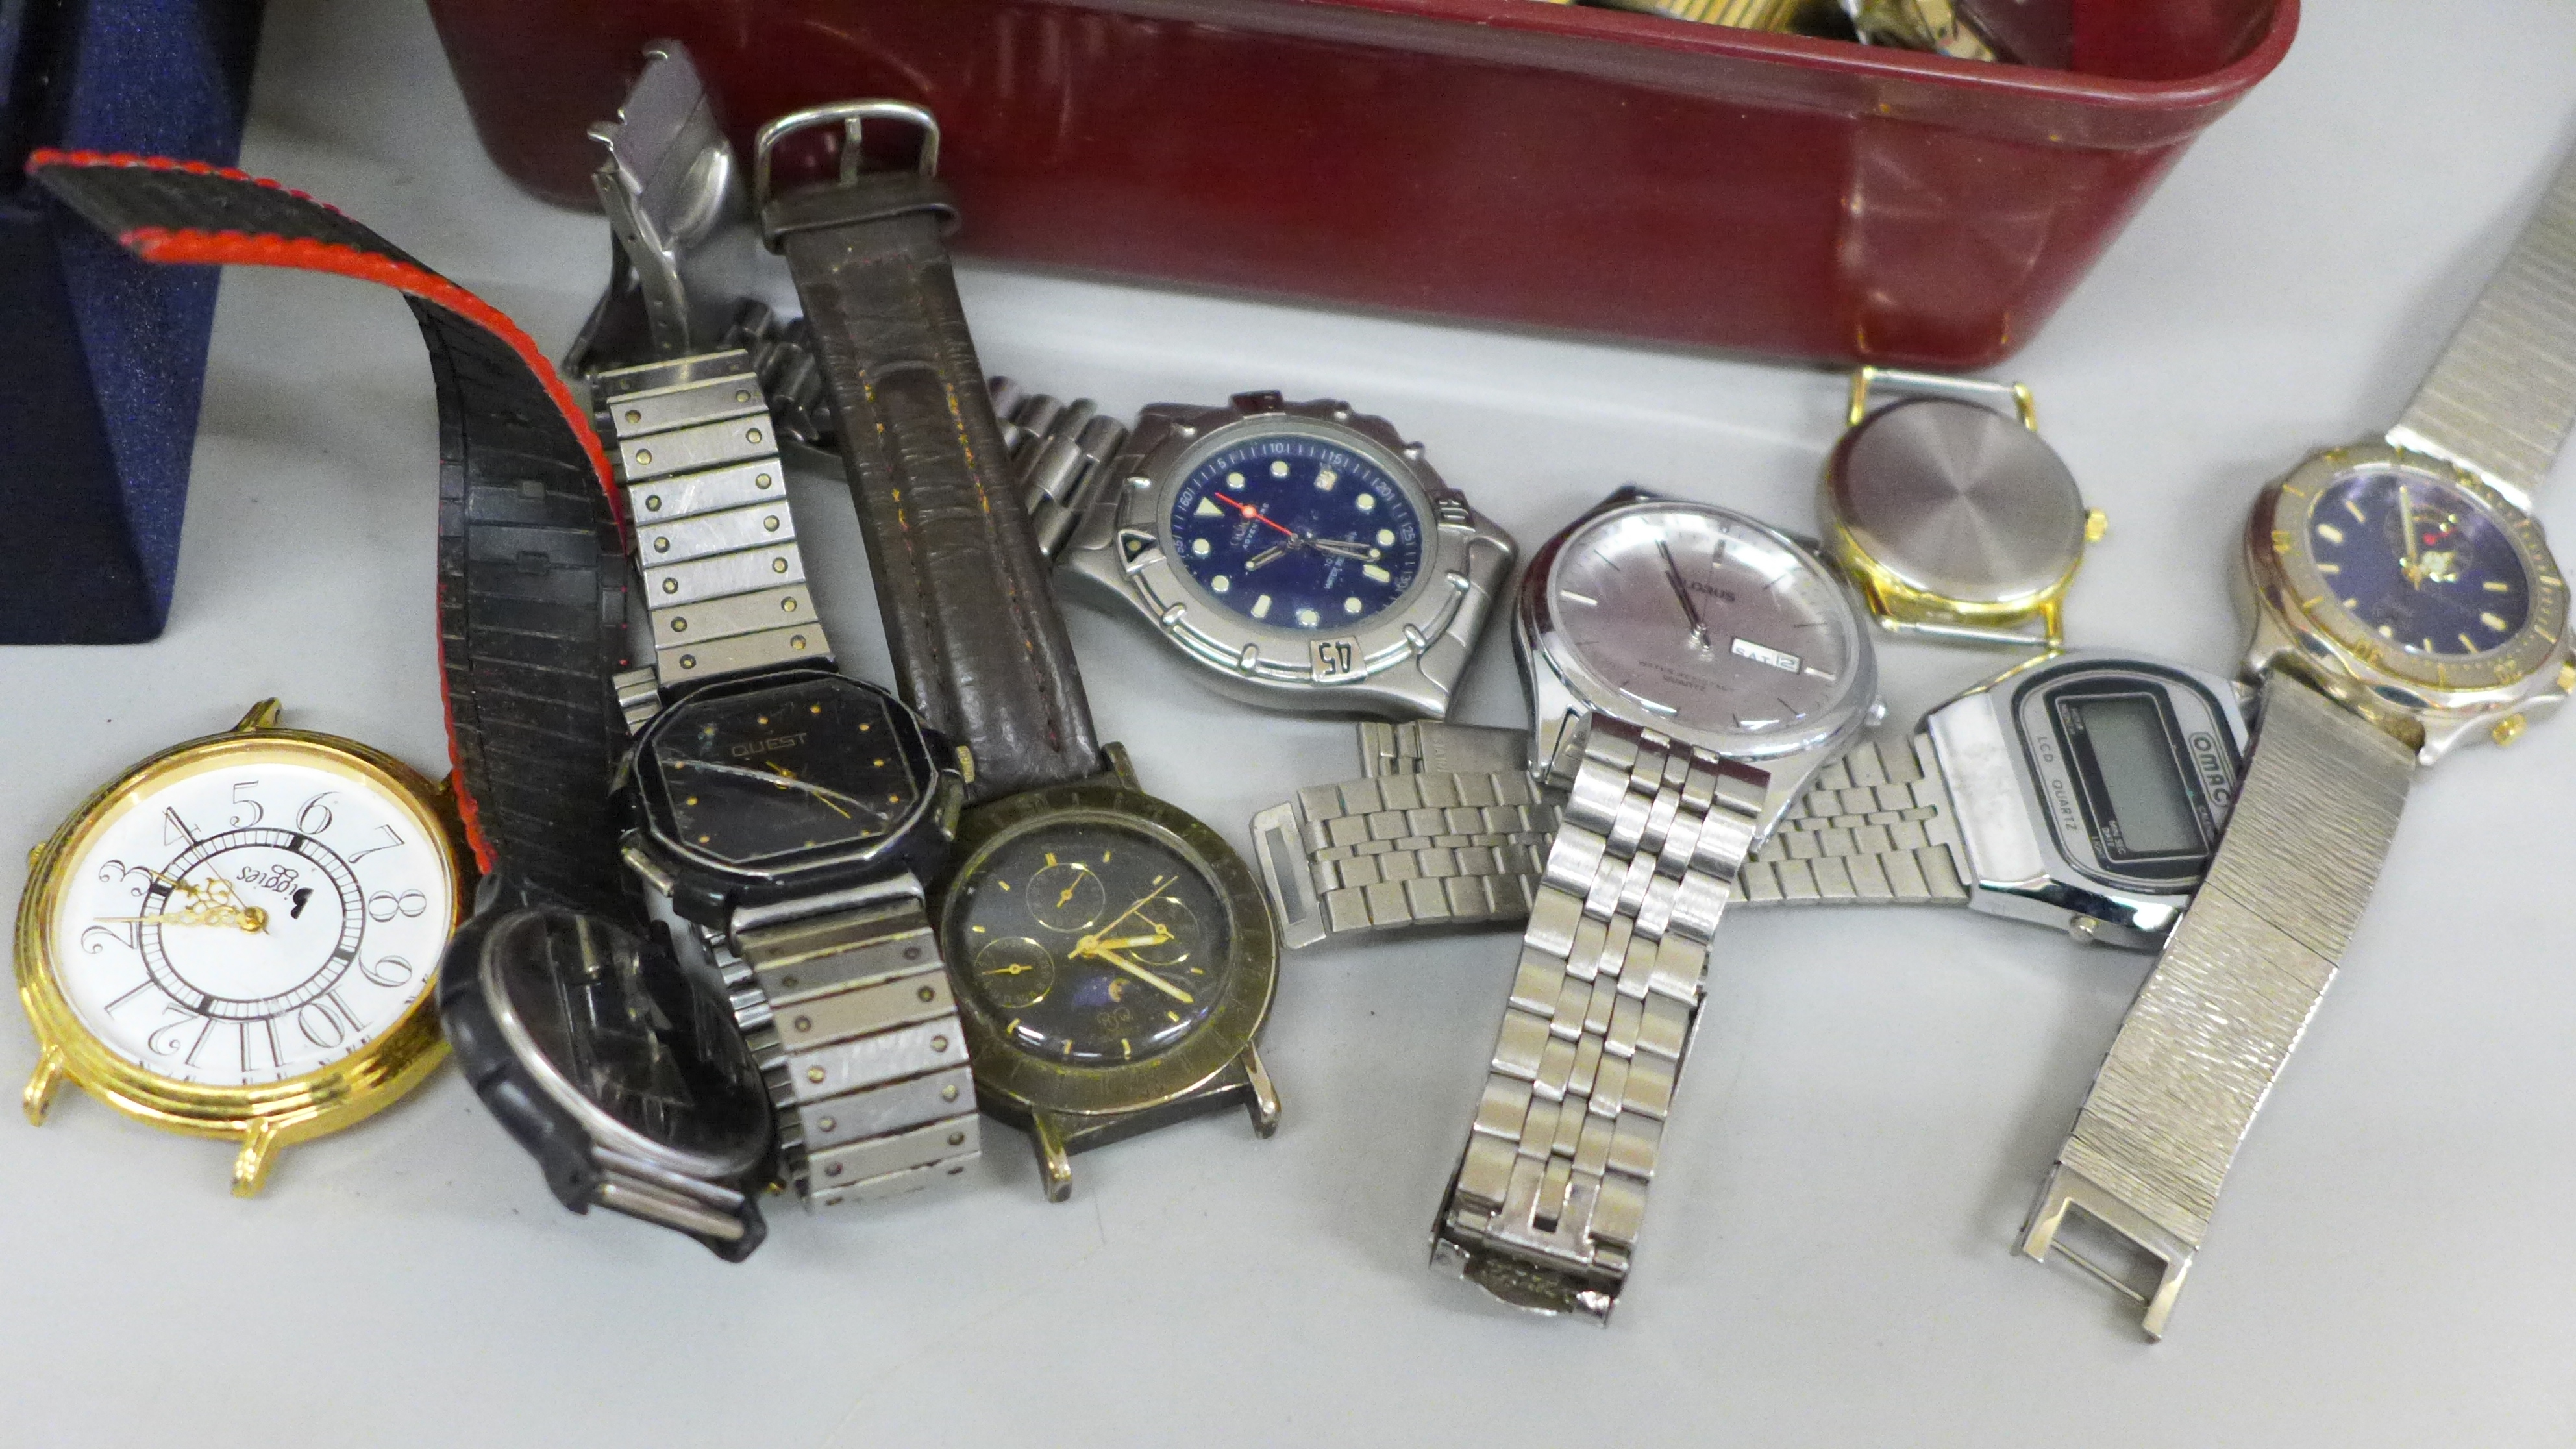 A Casio wristwatch and other wristwatches - Image 2 of 5